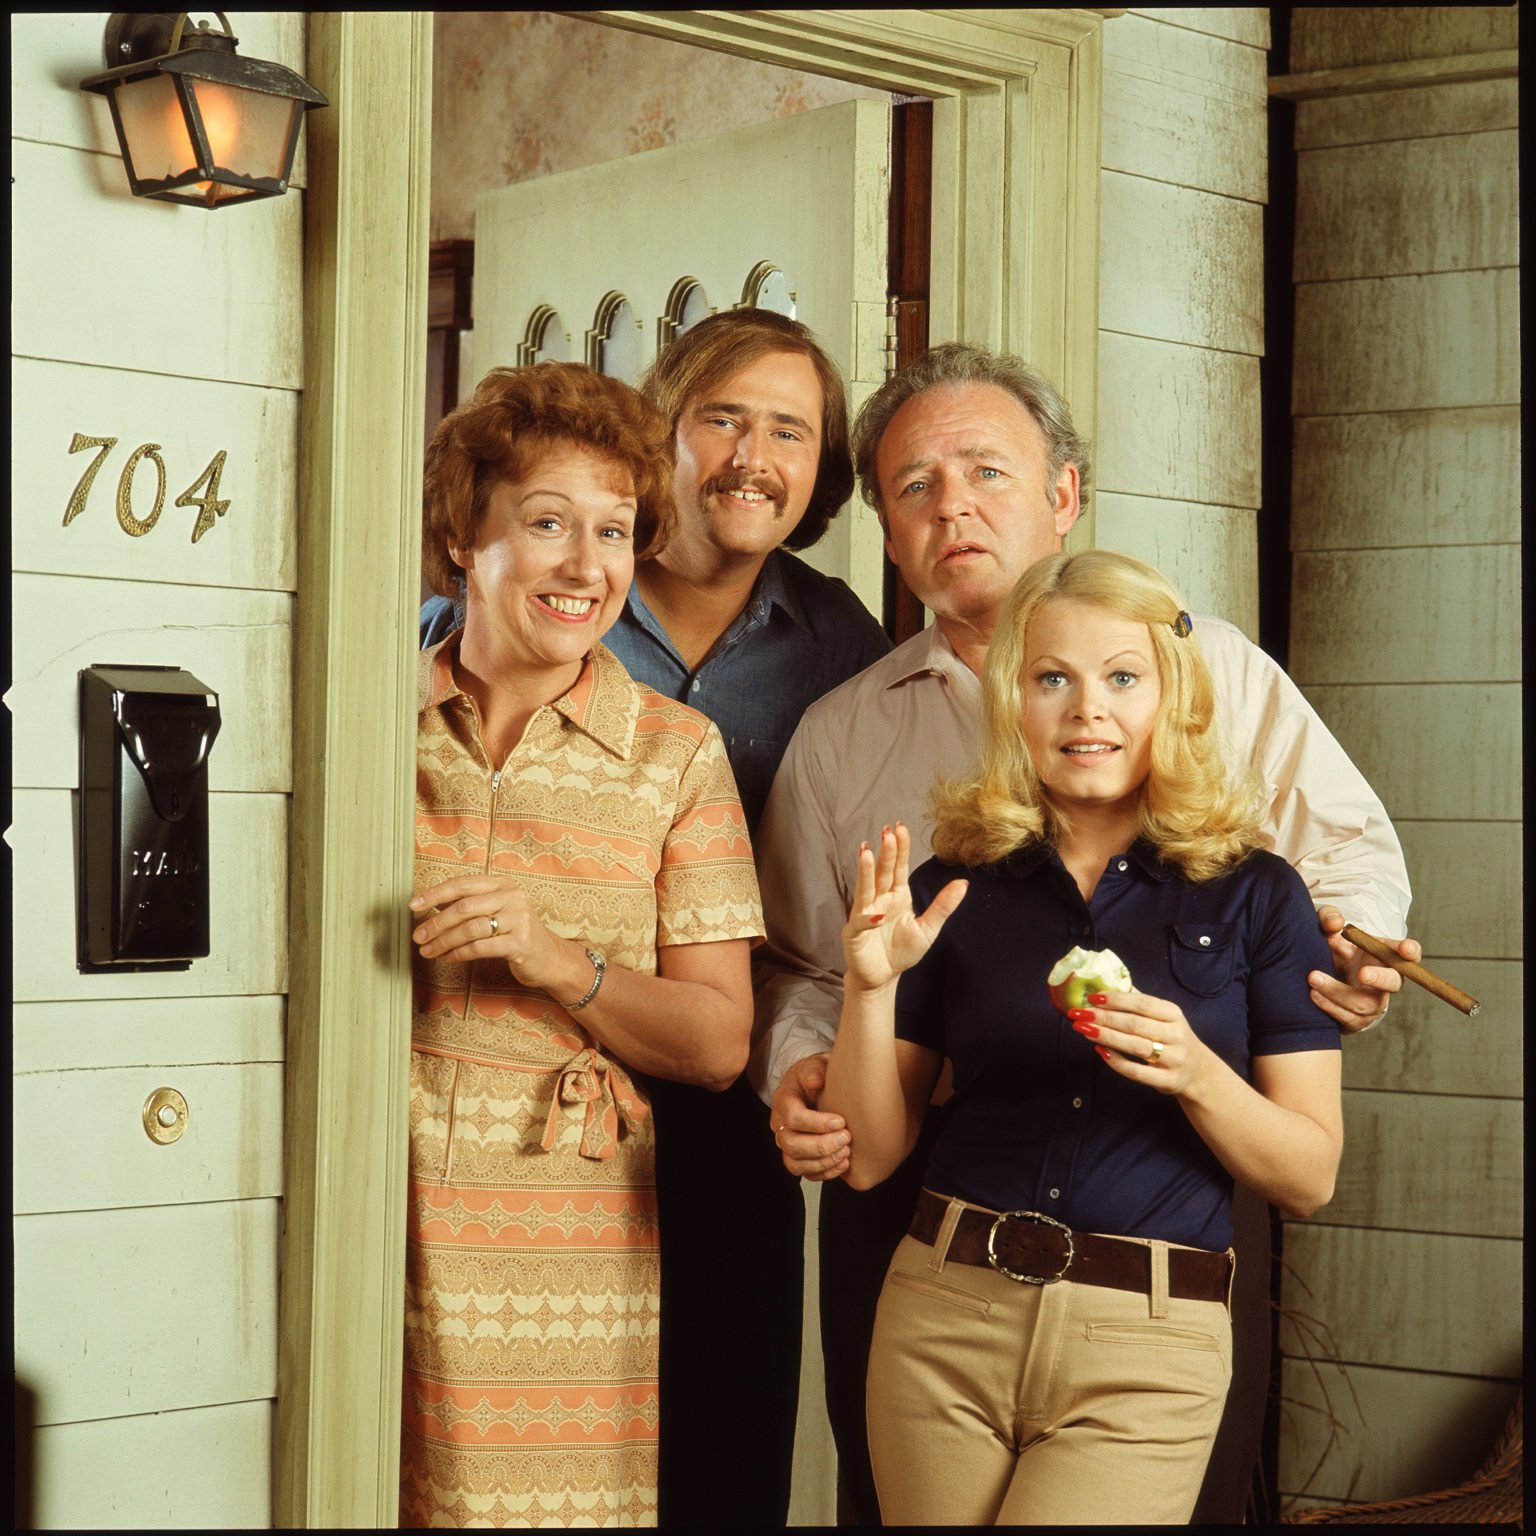 Promotional still shows the cast from the American television show 'All in the Family,' Los Angeles, California, early 1970s. | Source: Getty Images